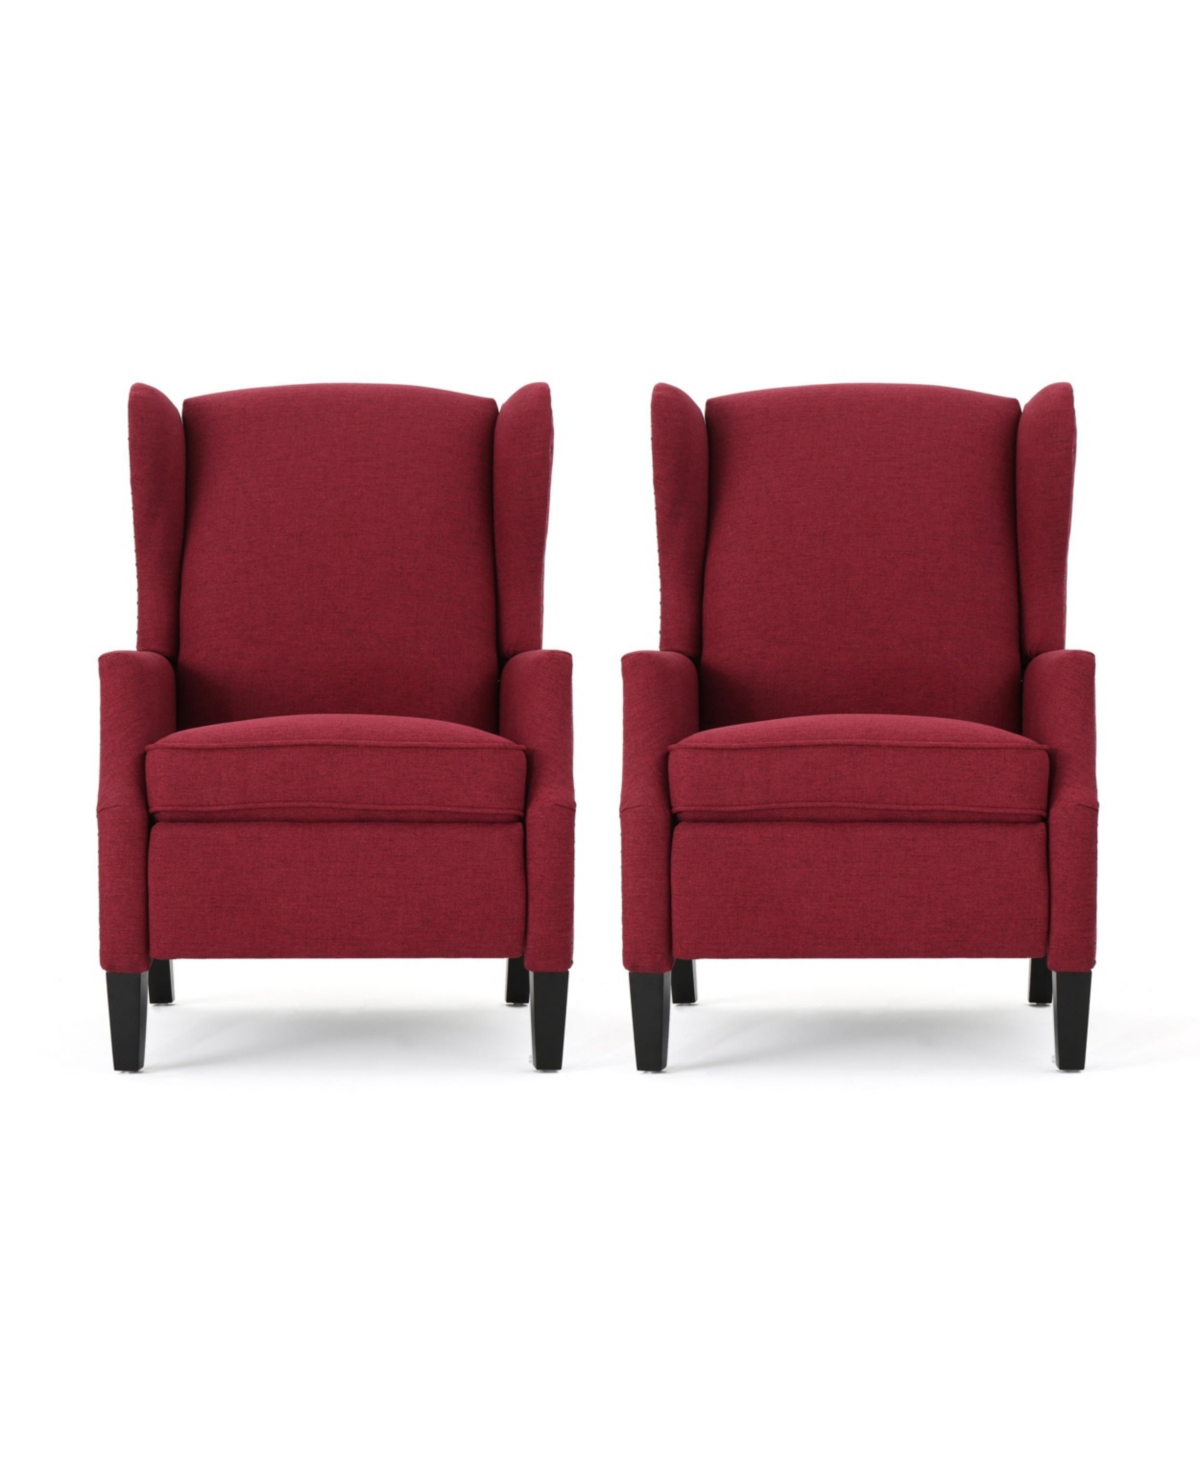 Noble House Wescott Contemporary Recliner Set, 2 Piece In Deep Red